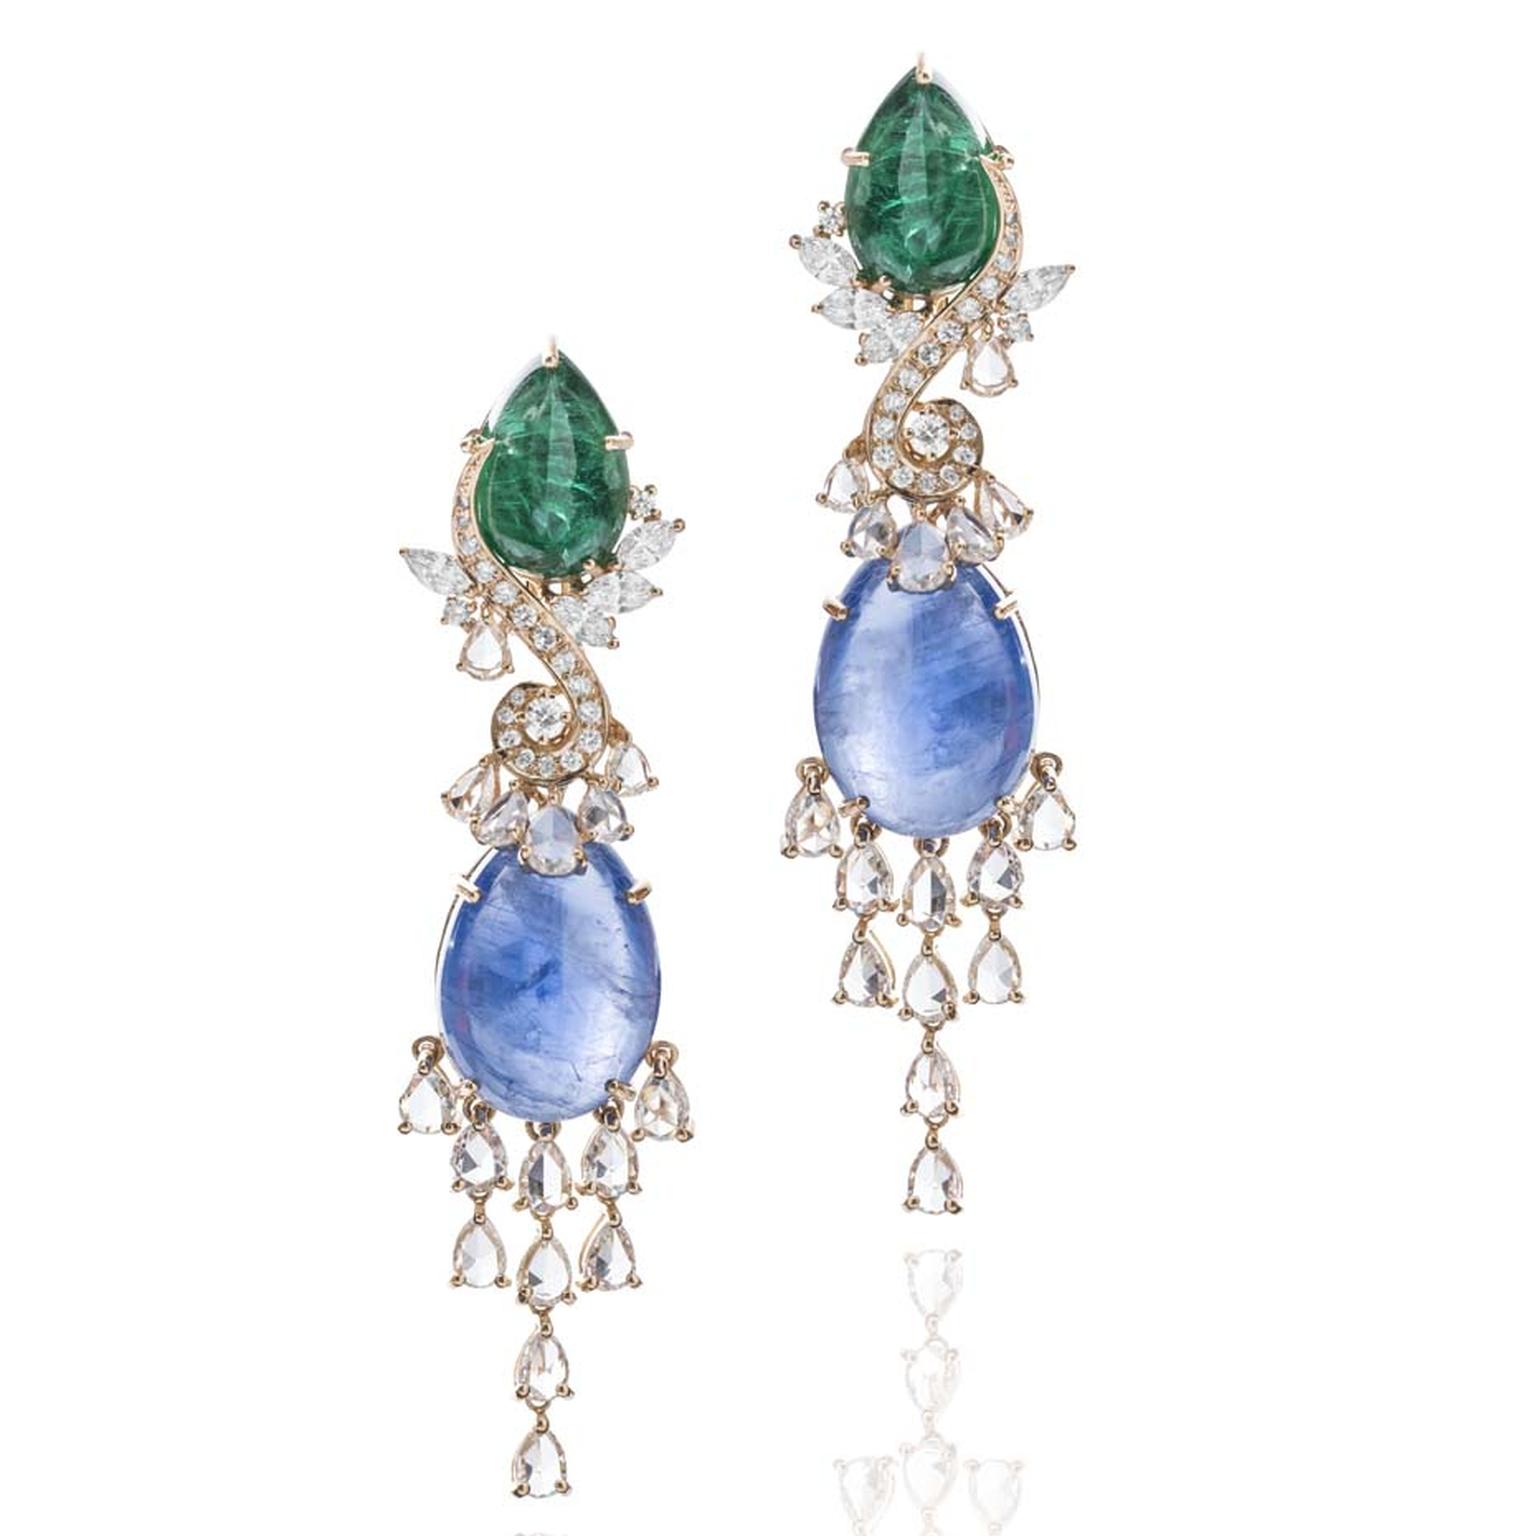 Fahra Khan_Le Jardin Exotique_A stunning pair of emerald, blue sapphire and diamond earrings in 18ct yellow gold by Farah Khan jewellery.jpg